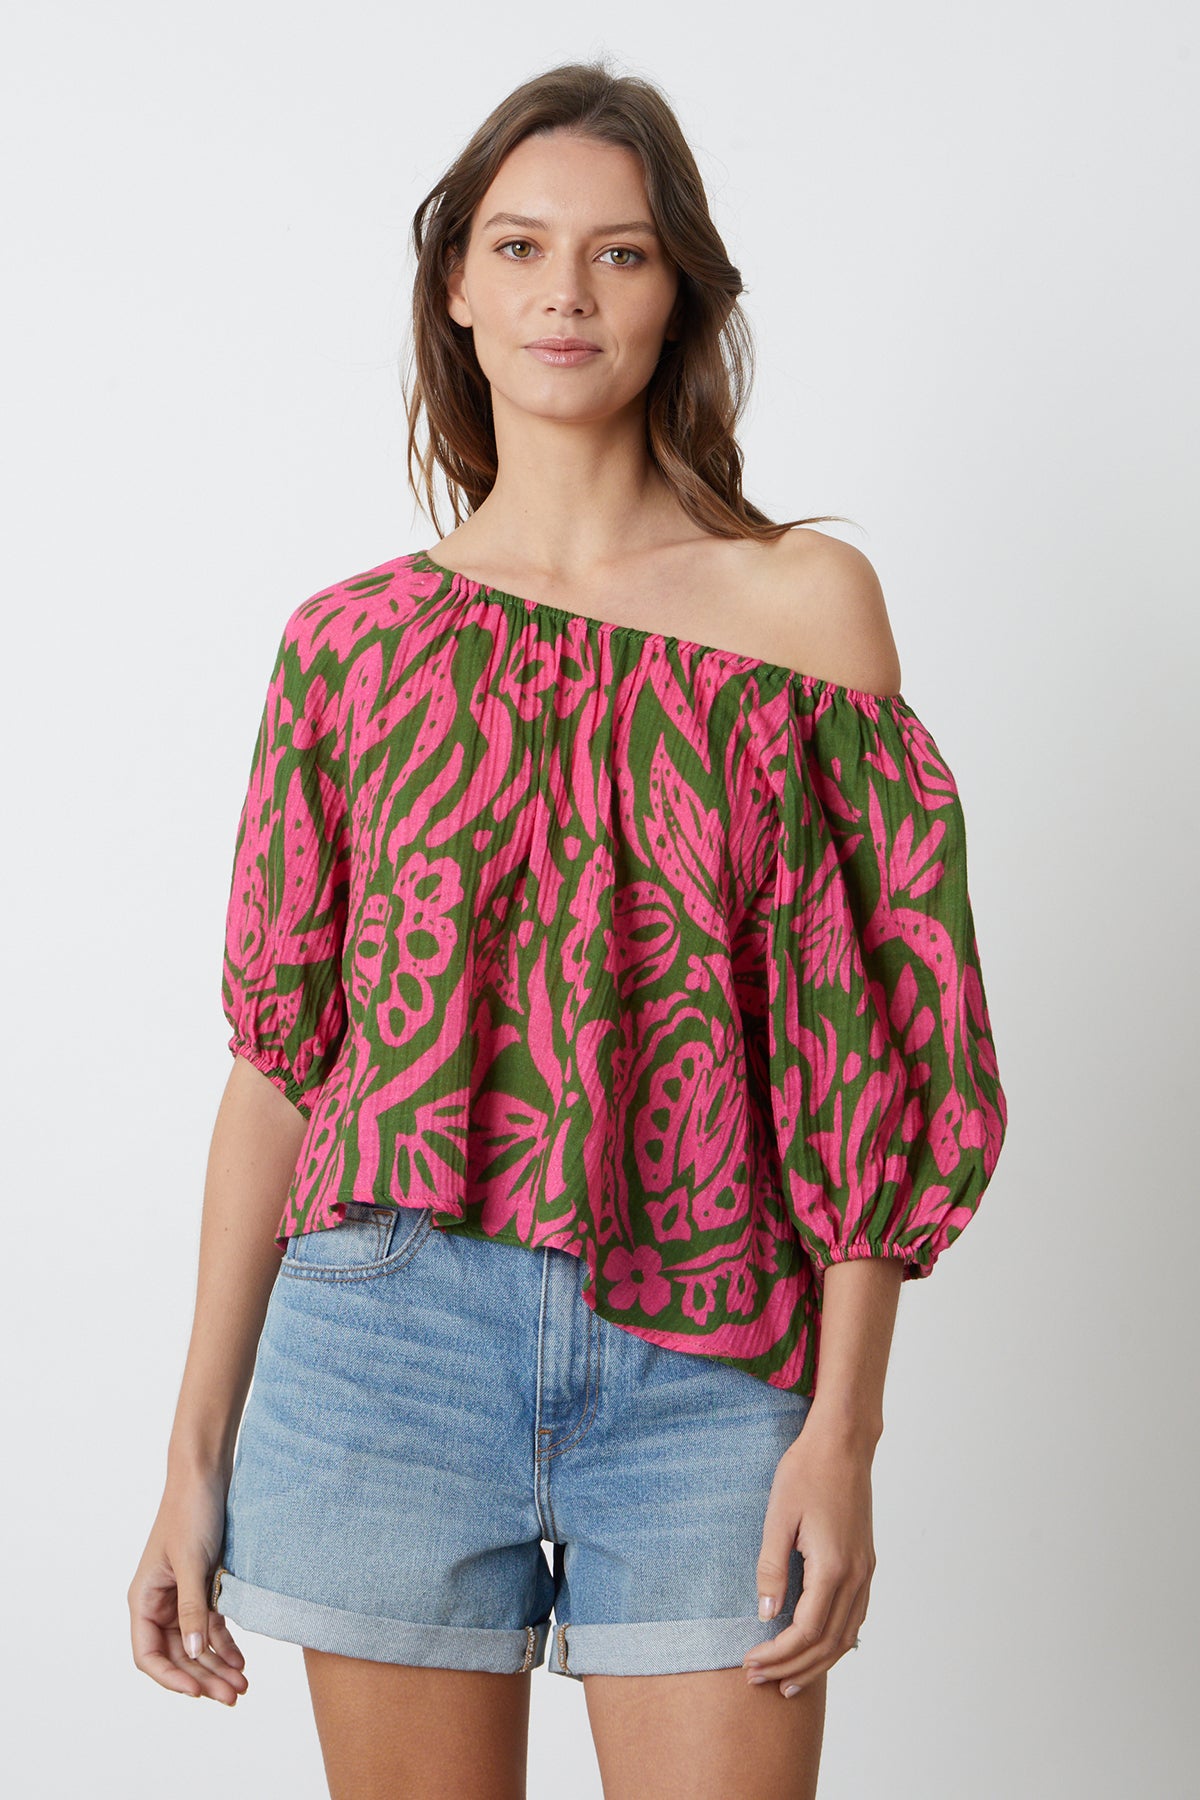   A model wearing a Velvet by Graham & Spencer CANDICE PRINTED COTTON GAUZE TOP in bold pink and green print off shoulder with denim shorts front 